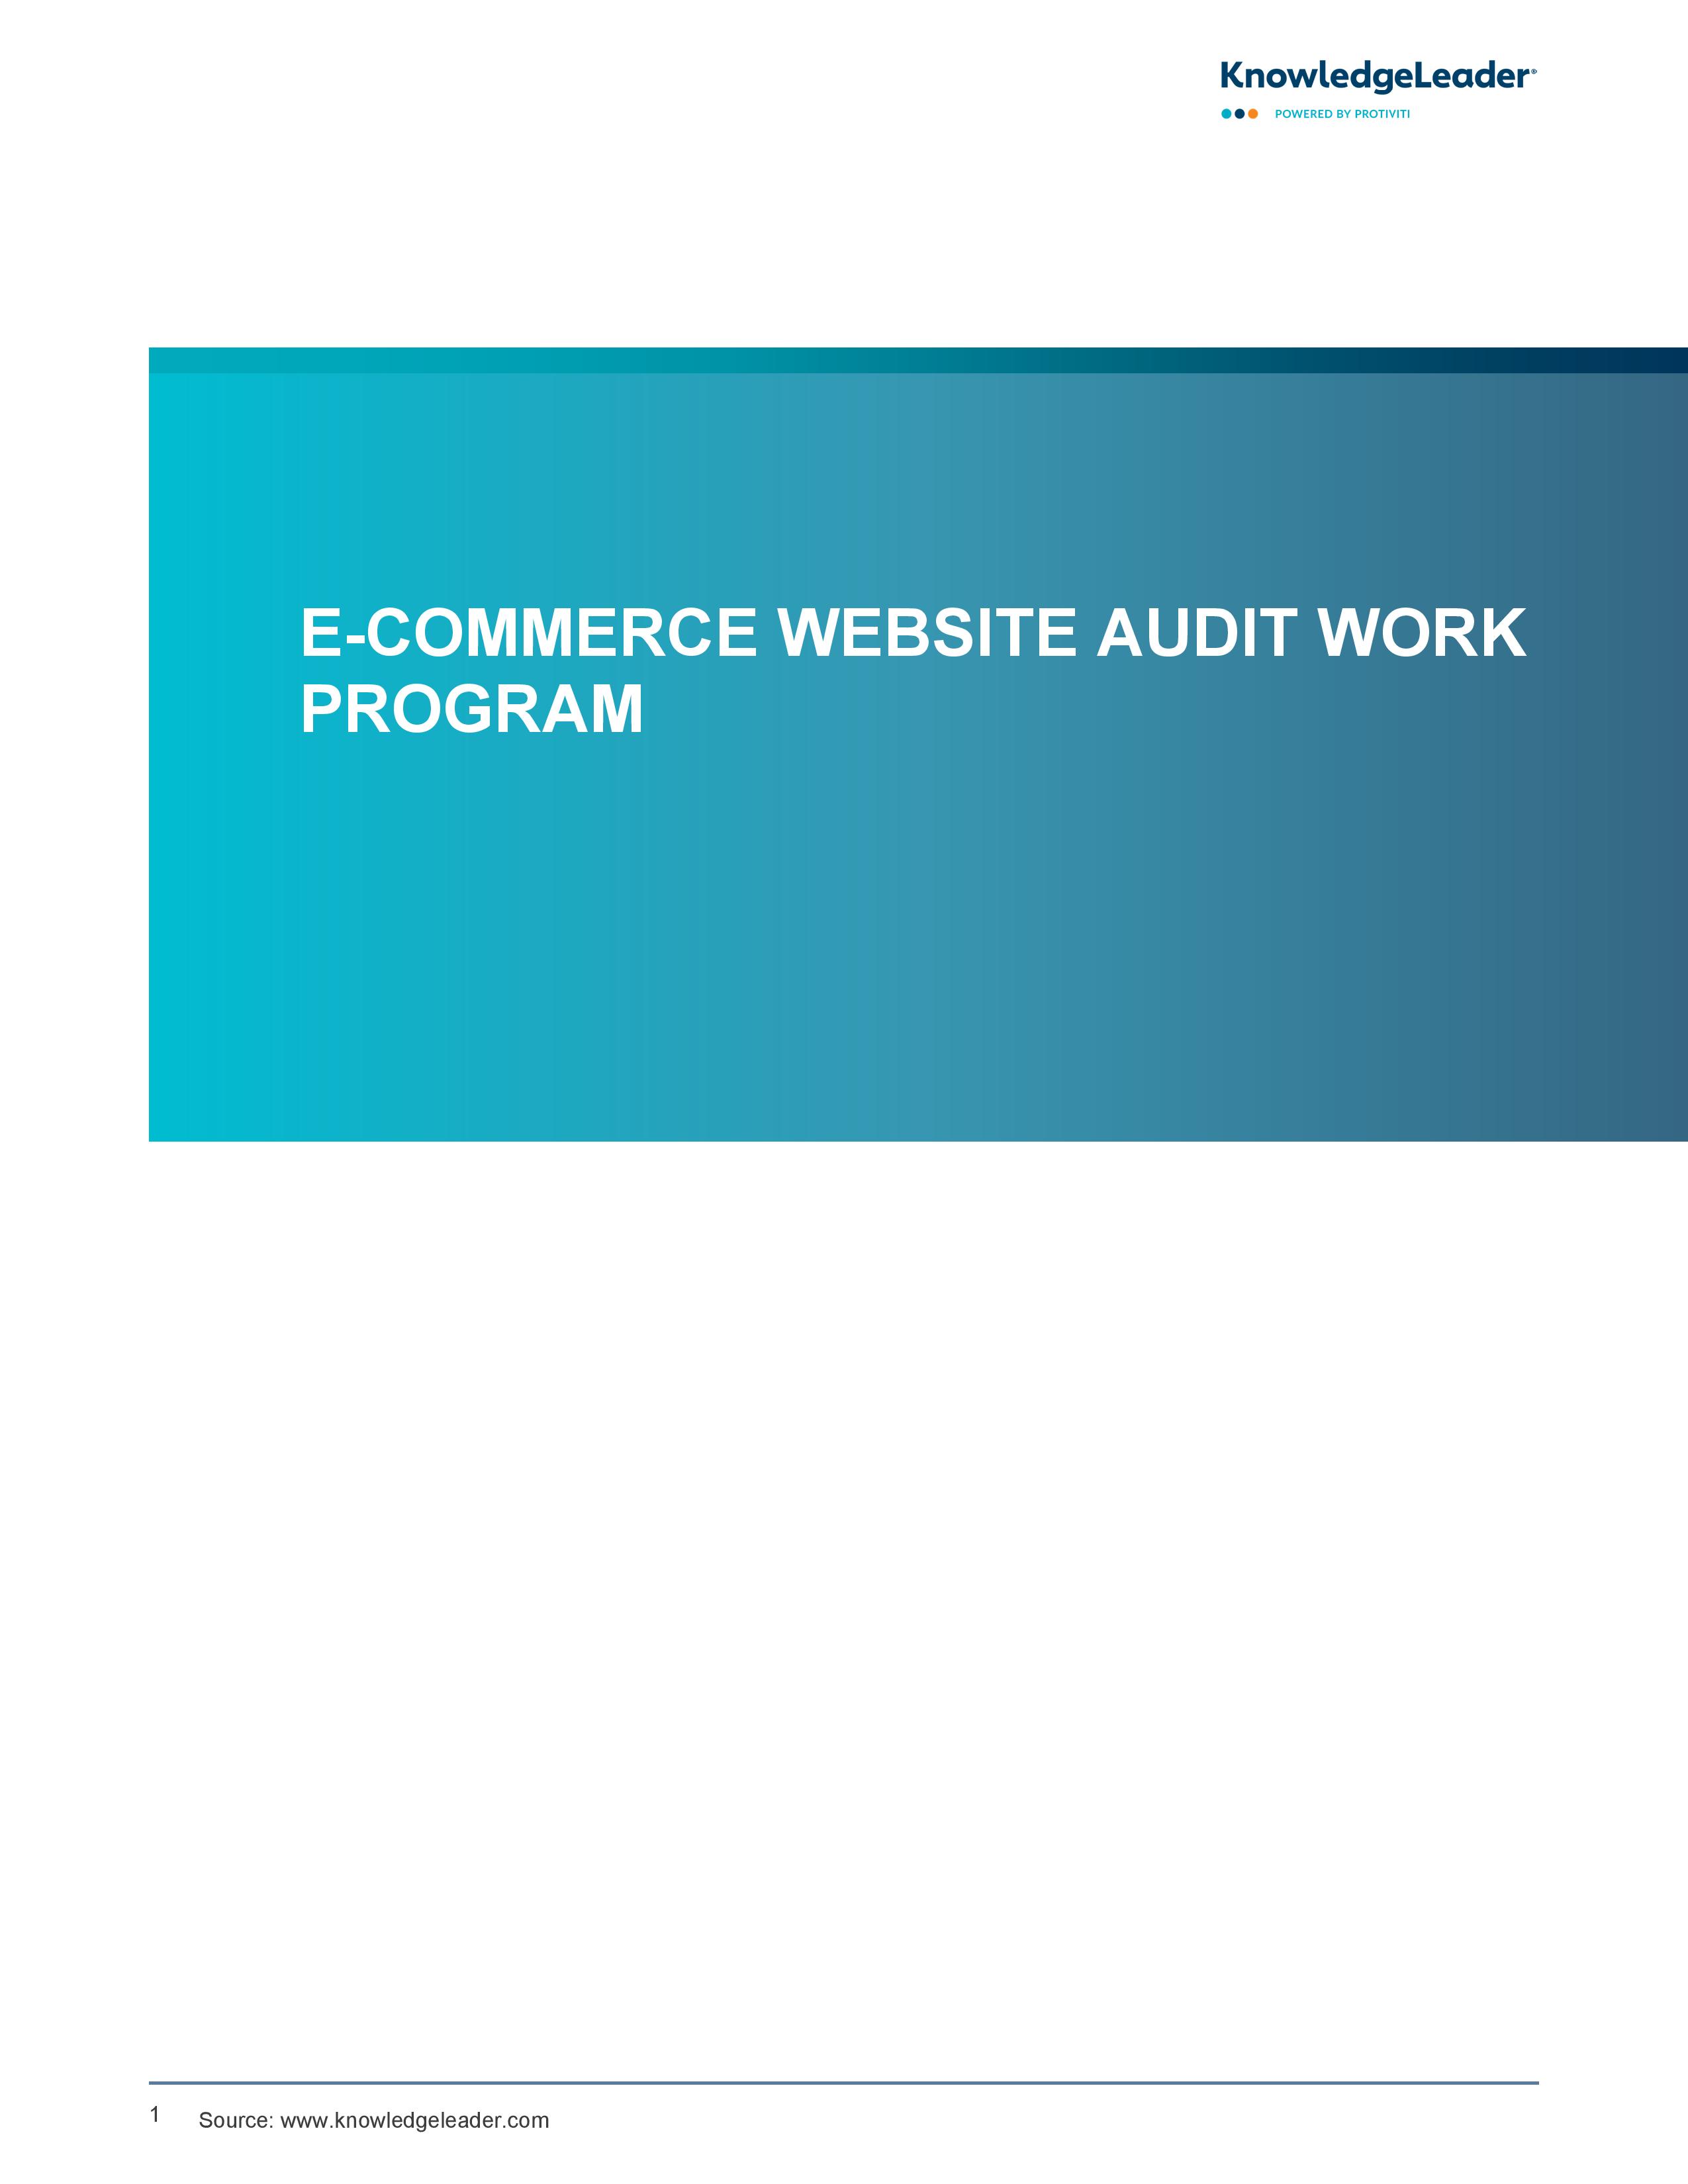 screenshot of the first page of E-Commerce Website Audit Work Program